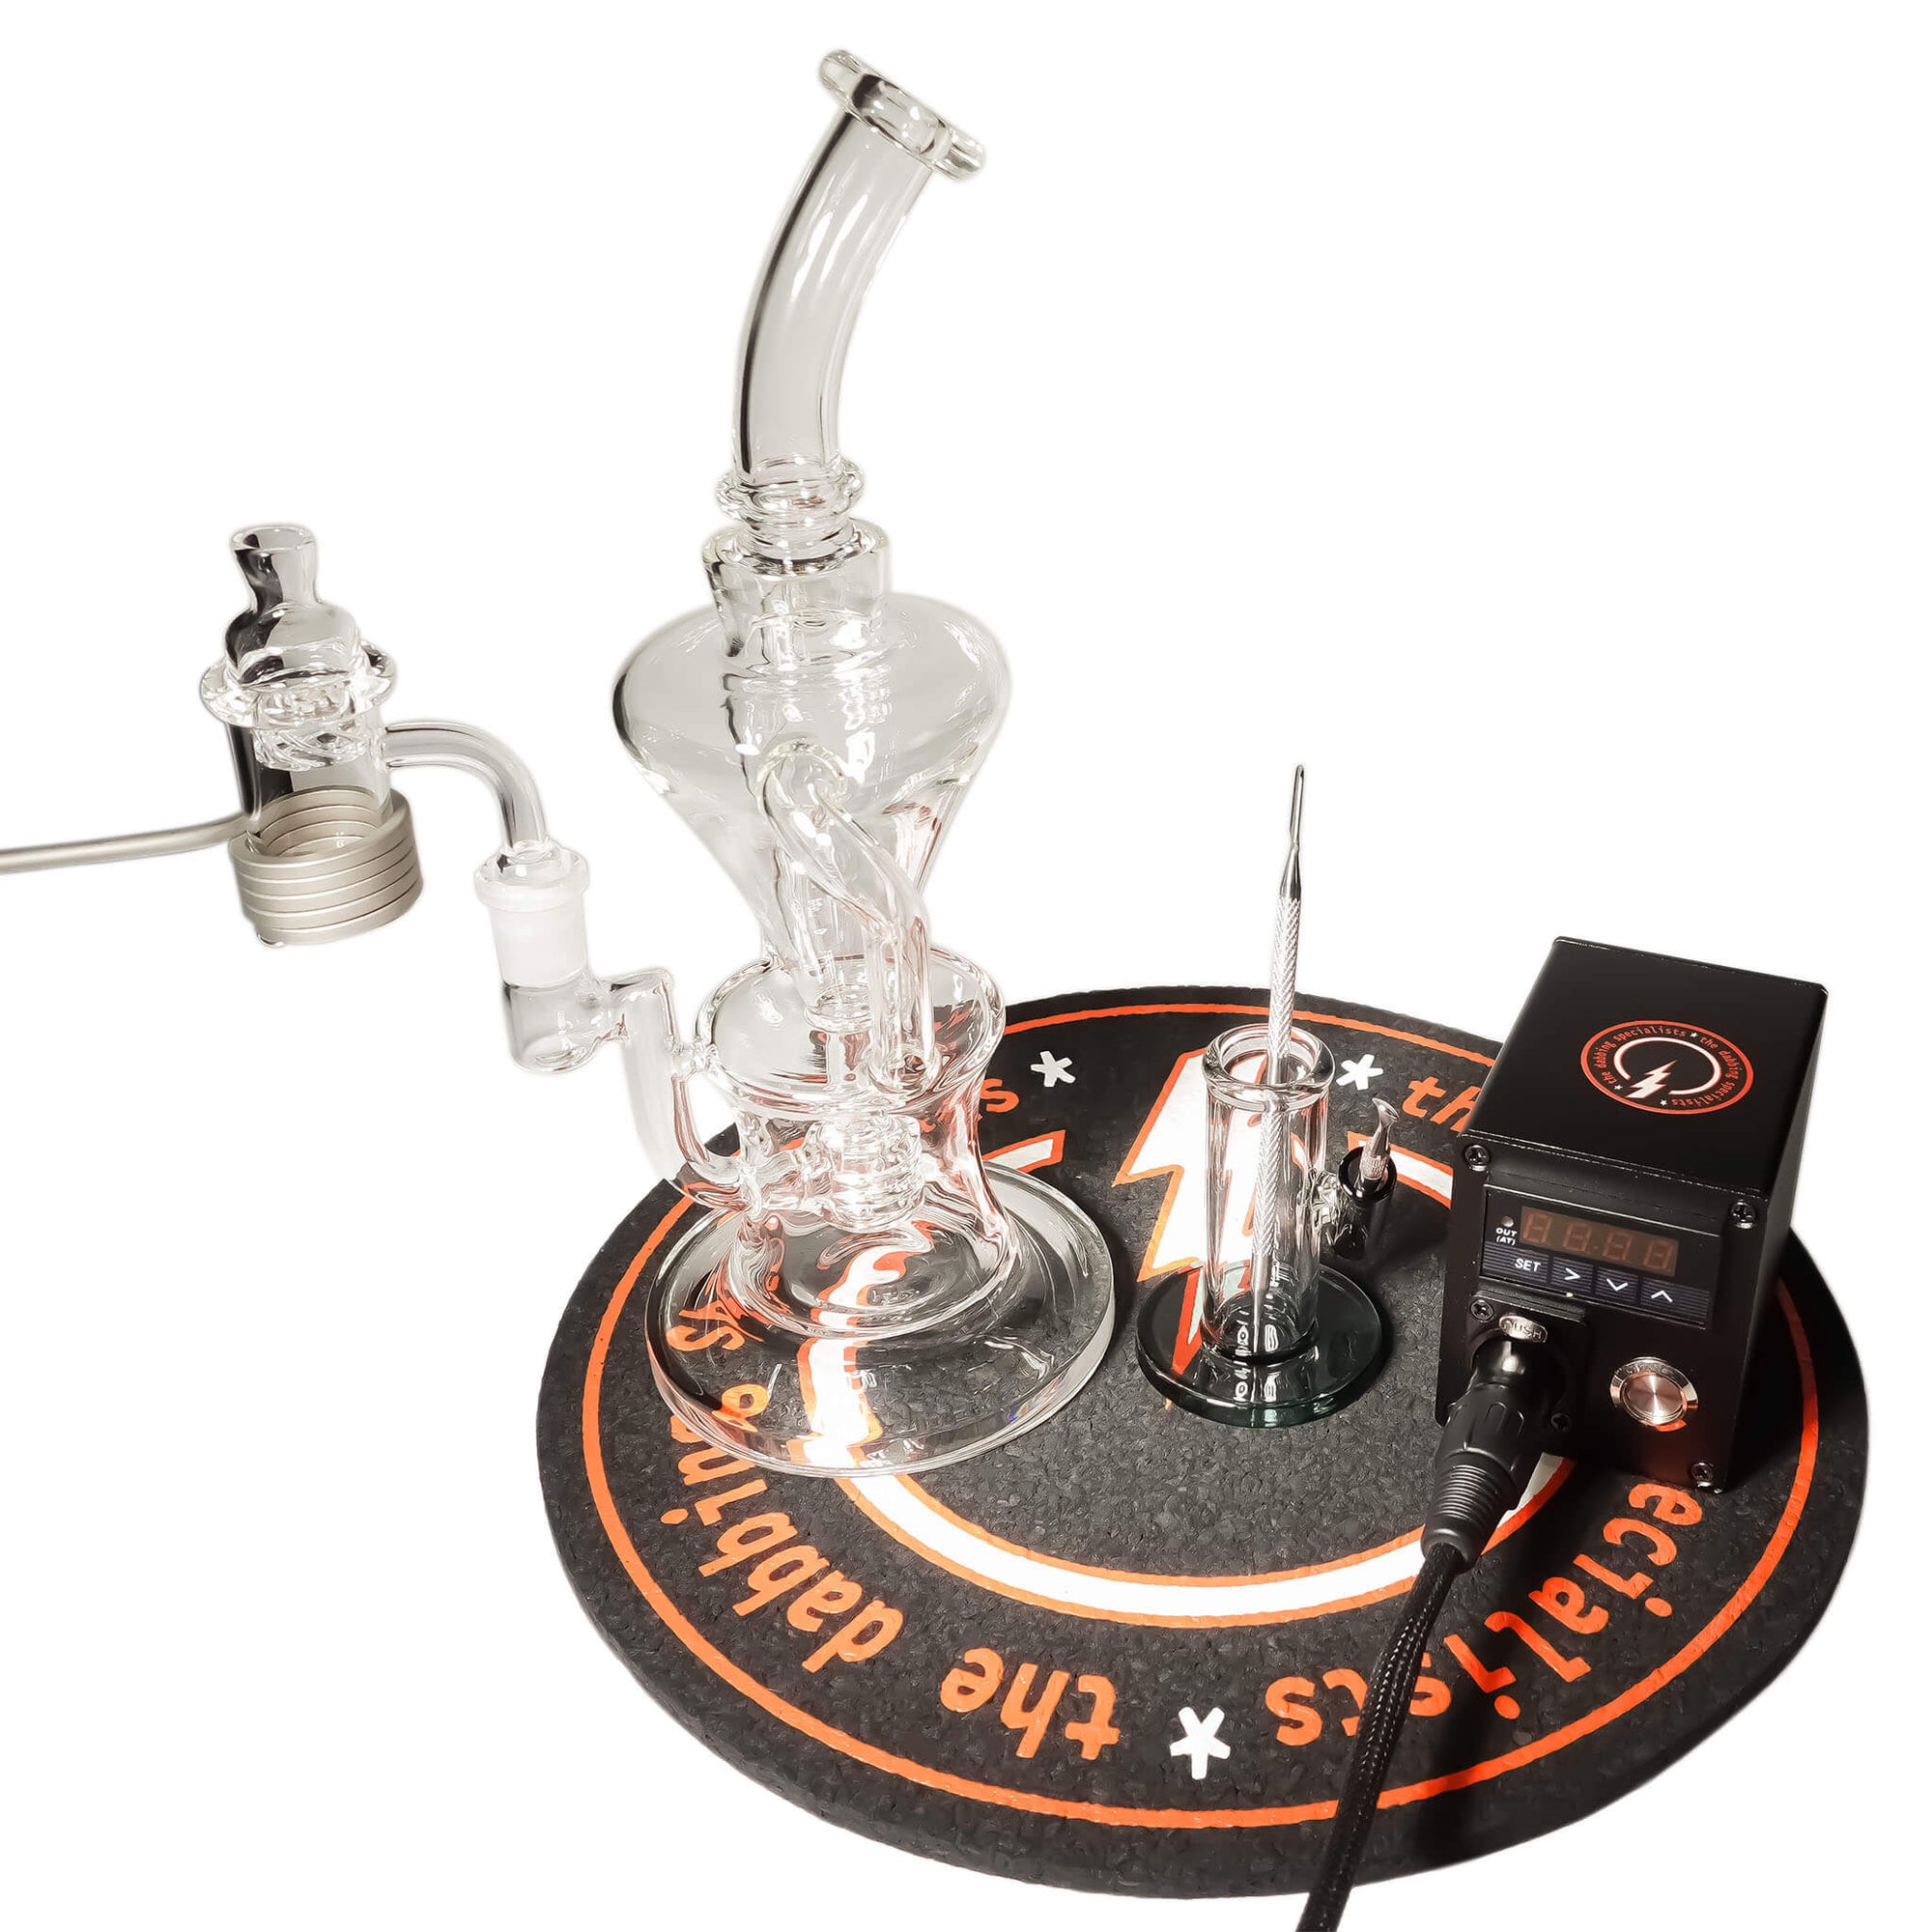 Futurus 25mm E-Banger Deluxe Enail Kit | Red Kit View | the dabbing specialists